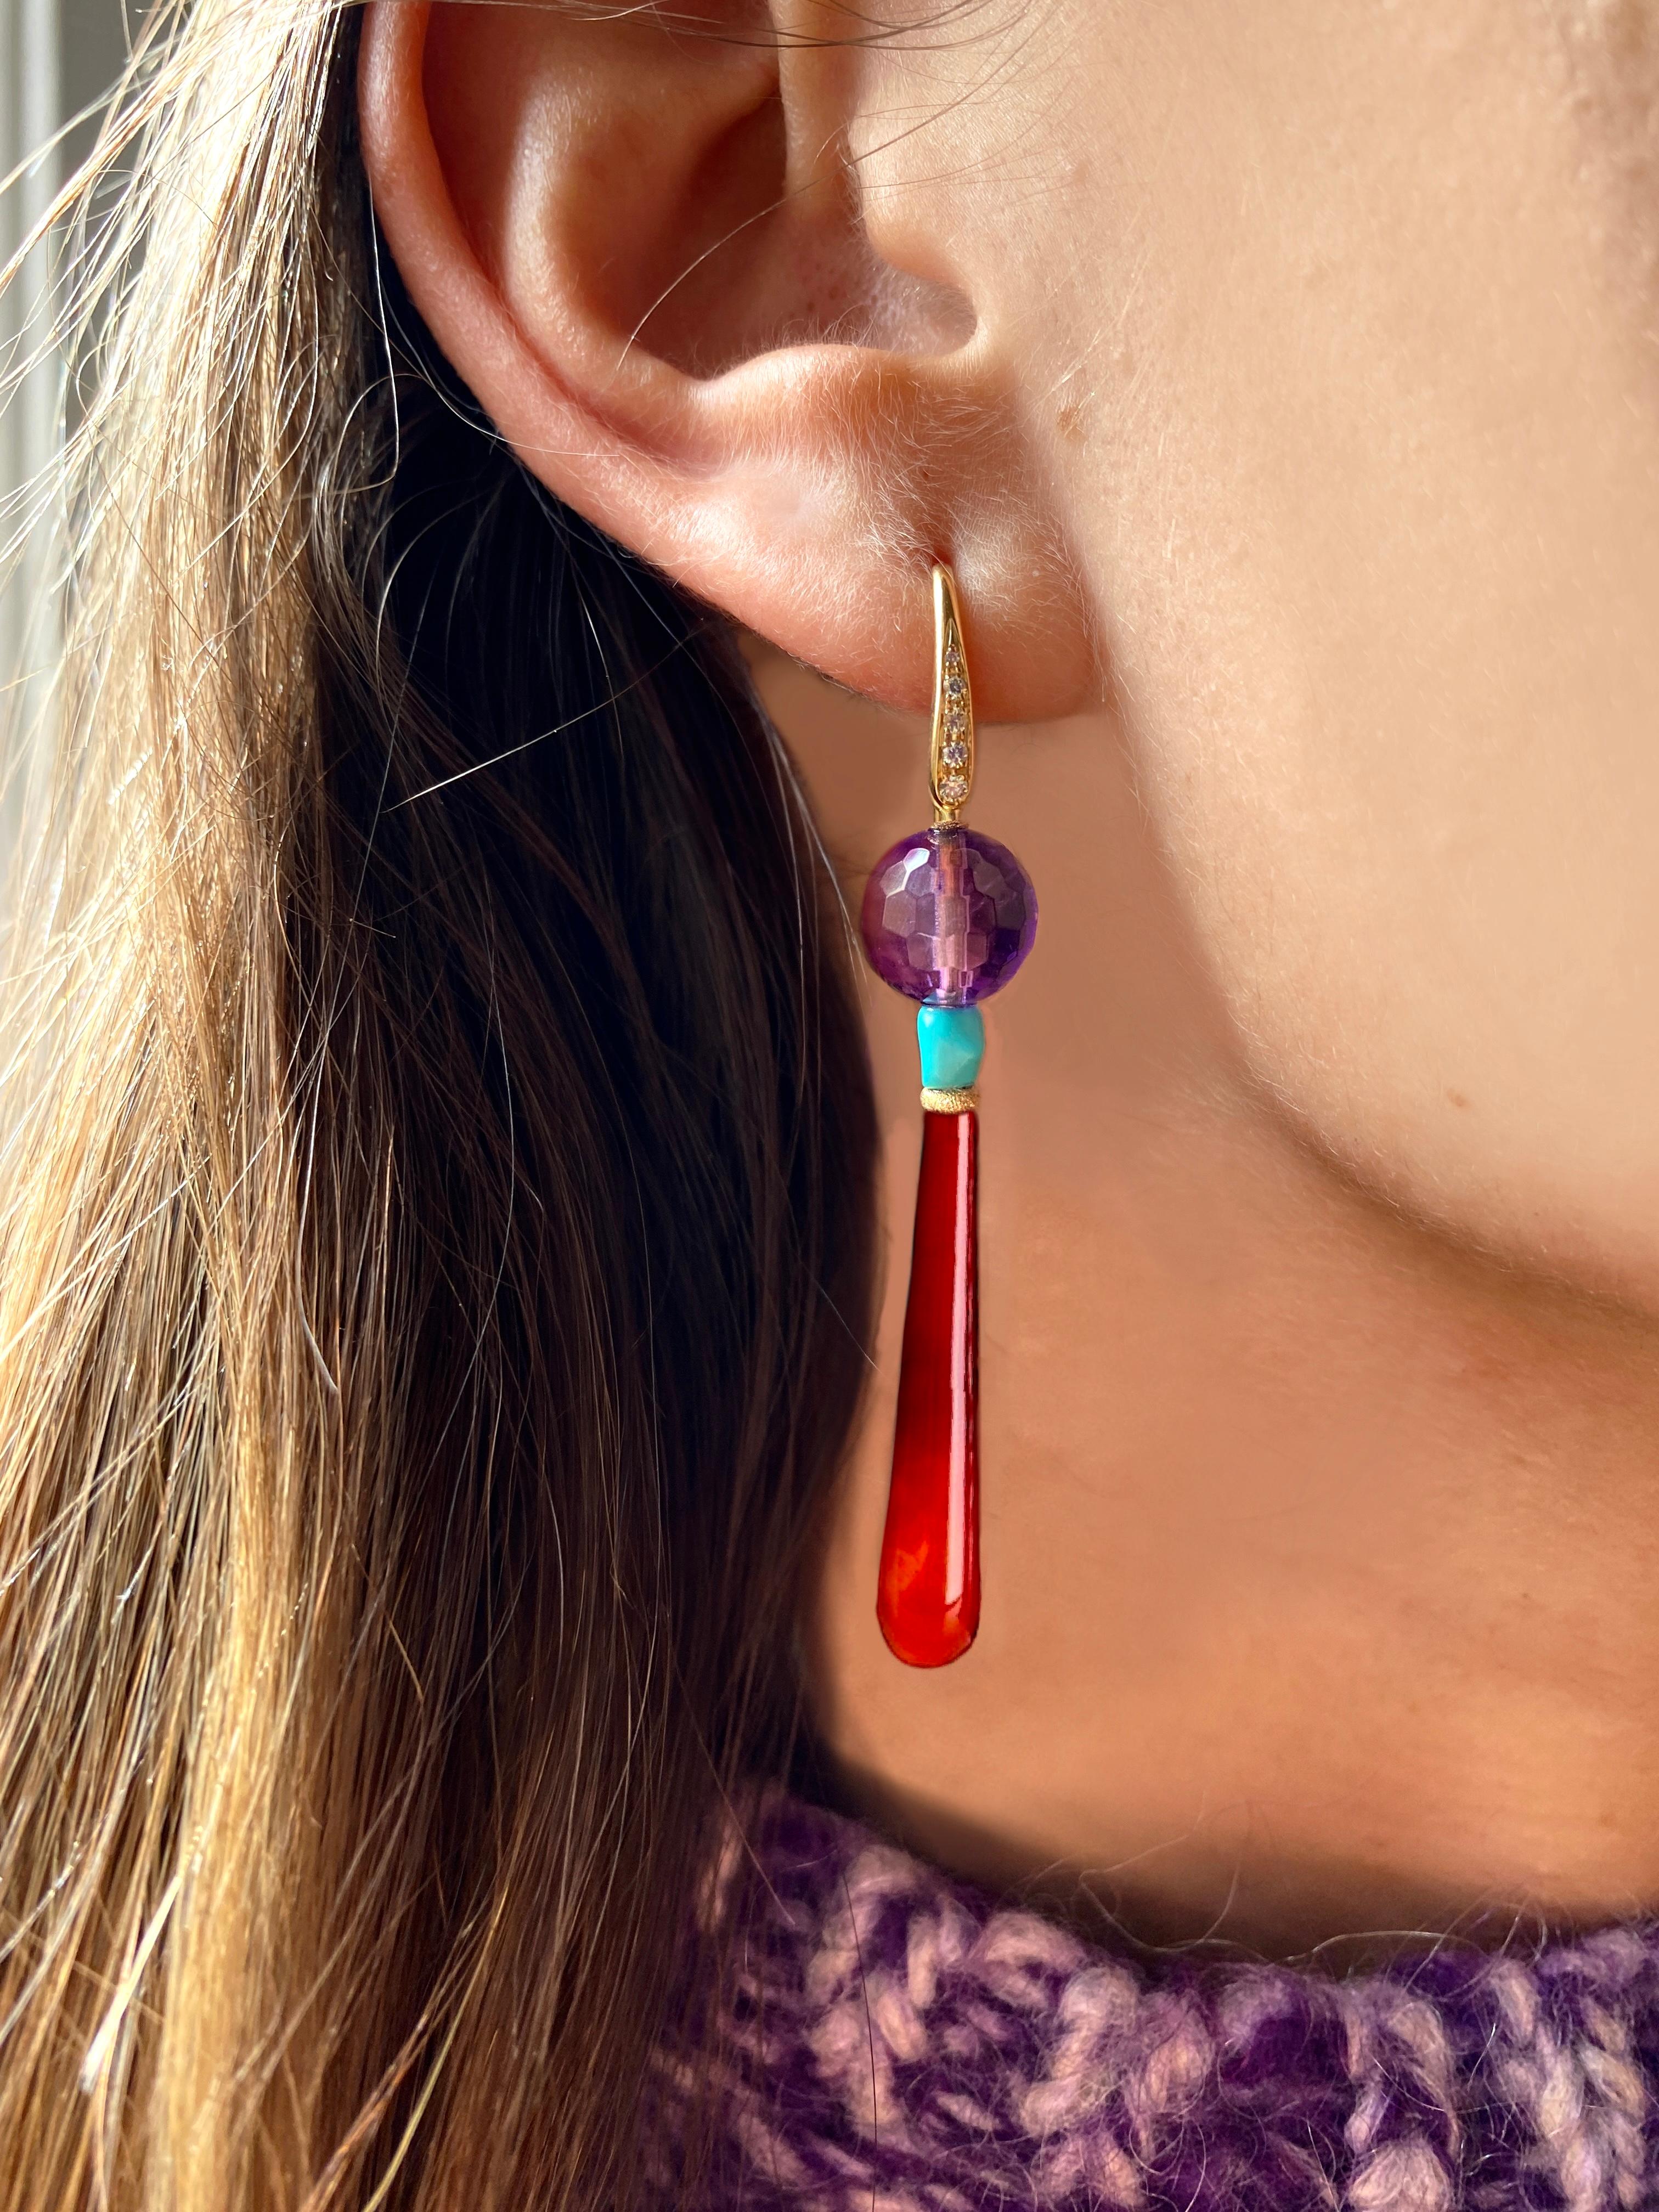 Rossella Ugolini Deco Collection Art Deco Style Carnelian Amethyst 18k Yellow Gold Made in Italy Dangle Earring.
The earrings beautifully adorned with smooth, vibrant stones beads, giving it a pop of color and a touch of bohemian charm. 
With its